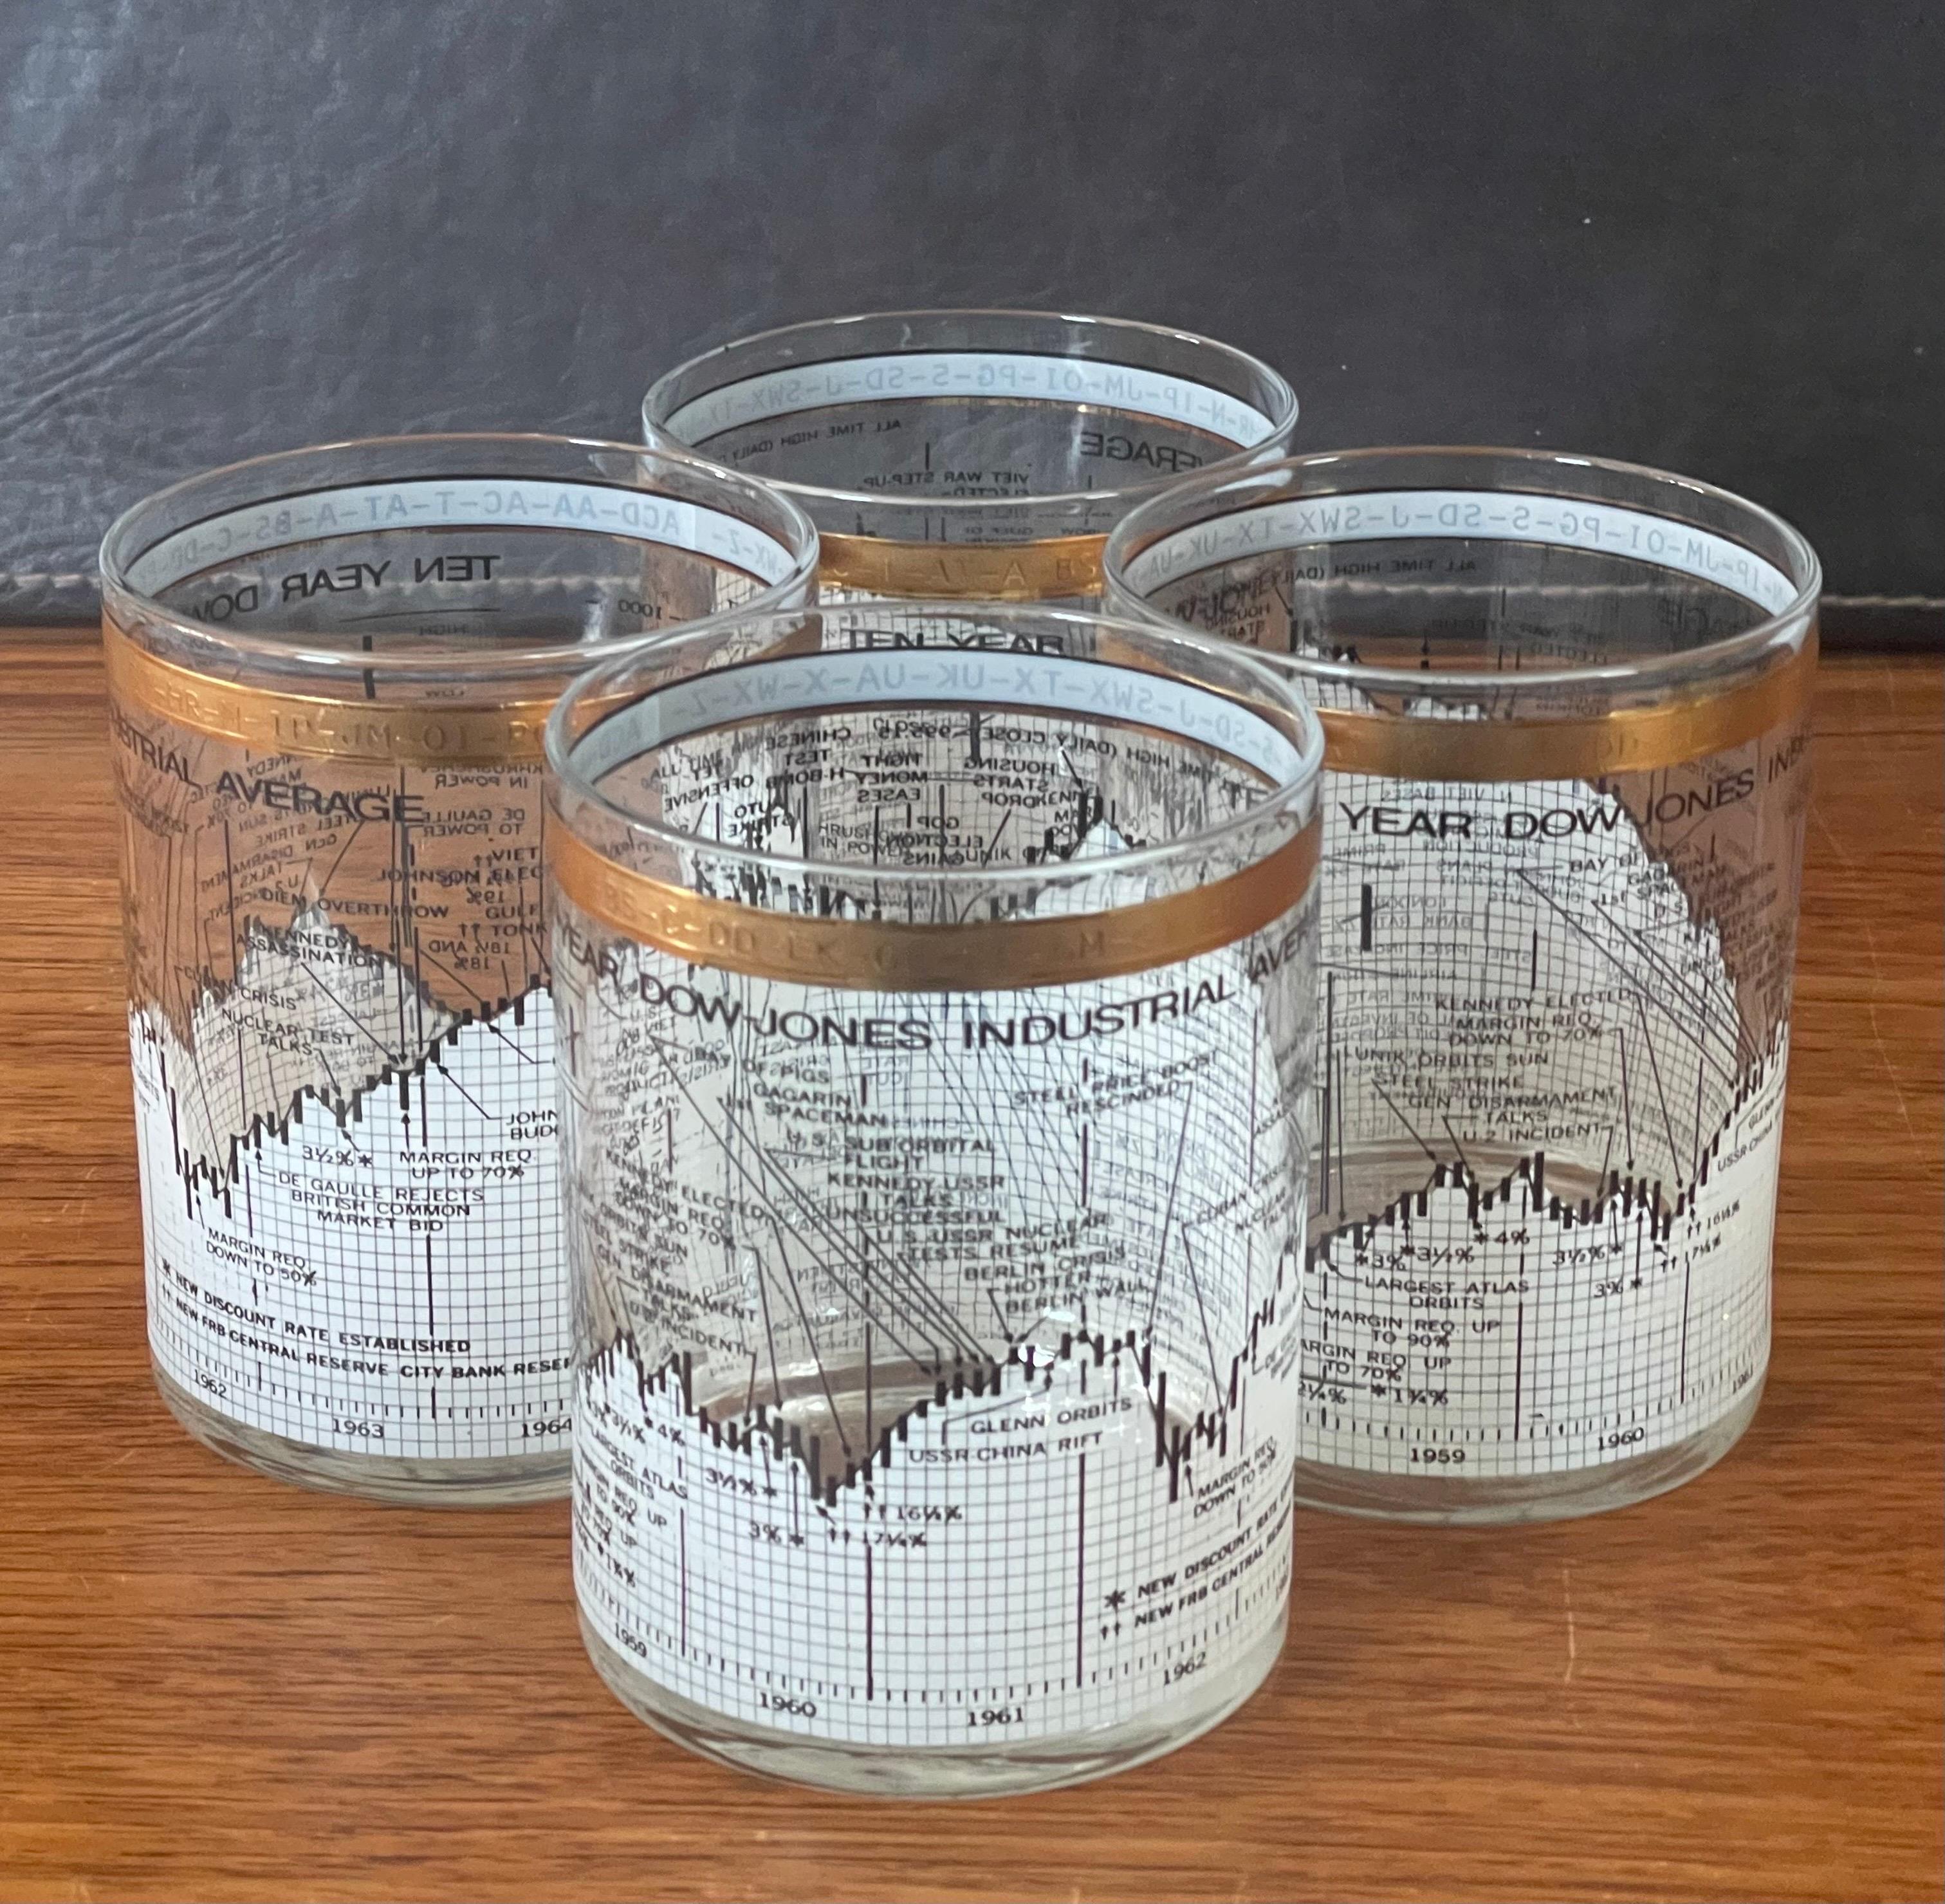 Great set of four double old fashioned glasses (14oz) tracking the Dow Jones Industrial Average (DJIA) from 1958 to 1968 by Cera, circa 1970s. Each glass is the same and captures 10 years of current events and their impact on the stock market. The